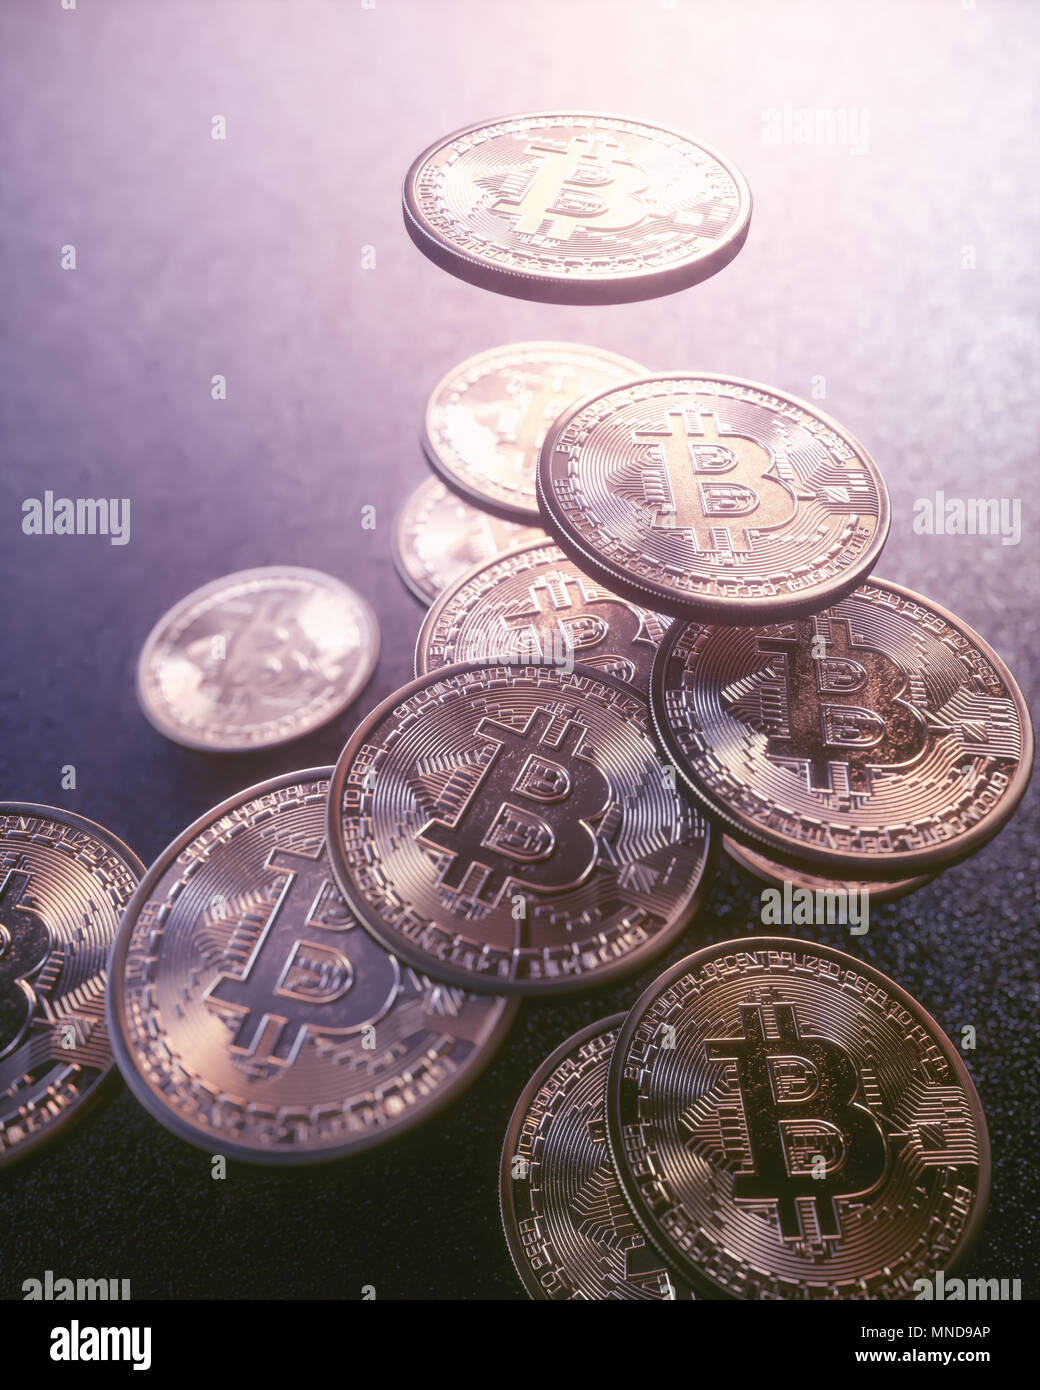 Cryptocurrency bitcoin business. Cryptocurrency digital money. Global business network market, modern currency exchange peer to peer. Financial busine Stock Photo